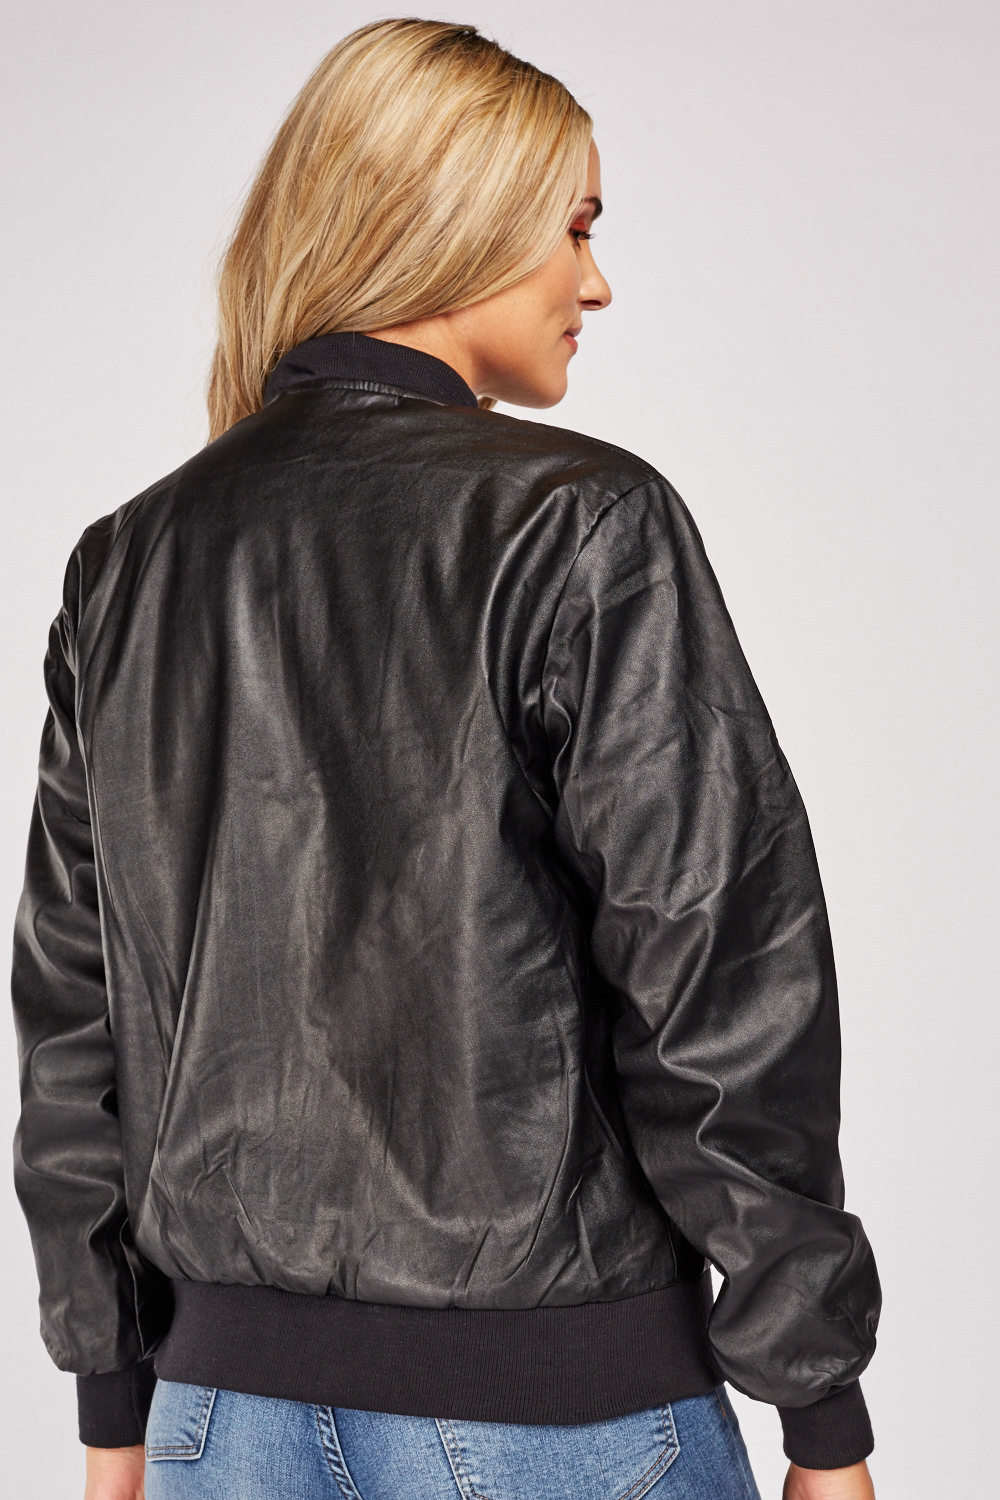 Faux Leather Contrast Bomber Jacket - Just $7